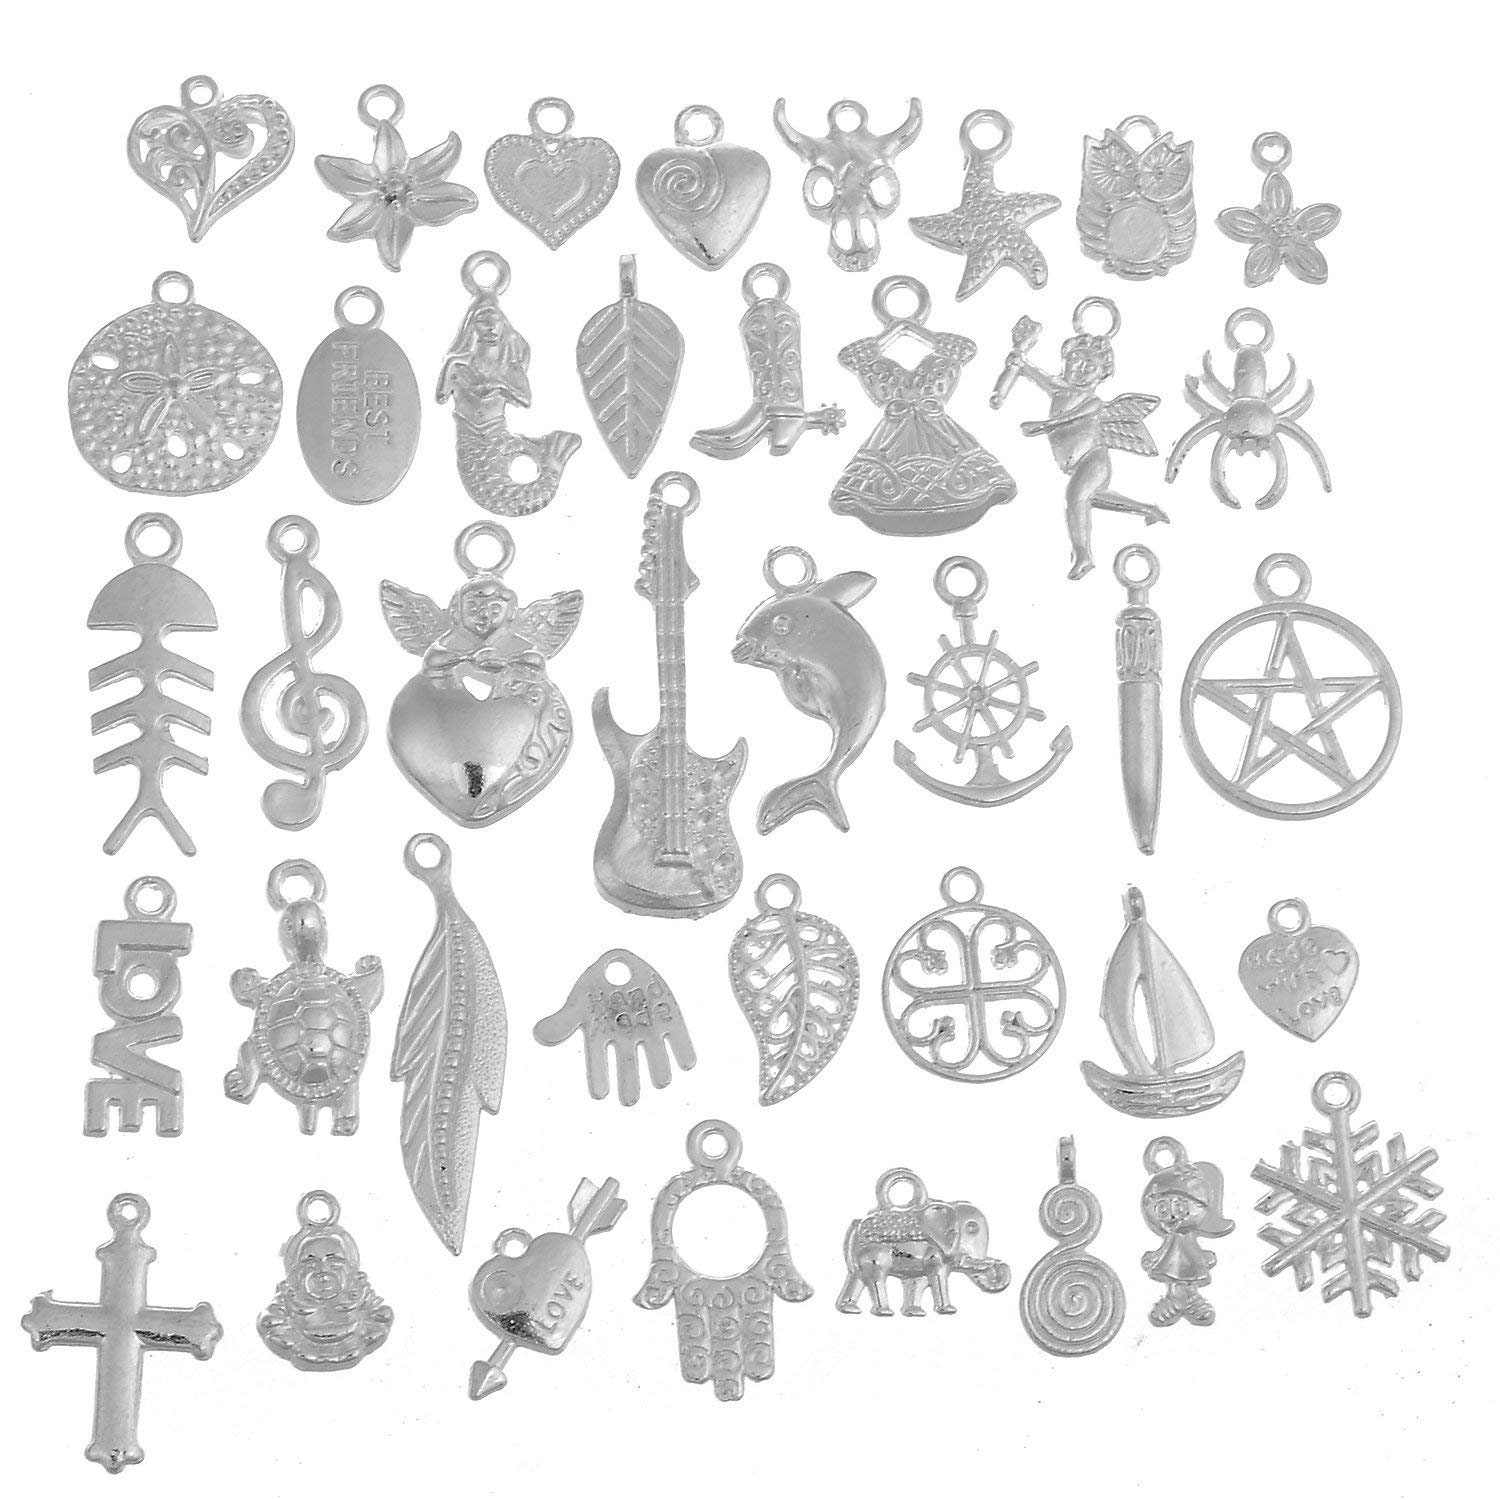 RUBYCA 80Pcs Assorted Mixed Silver Charms Pendants for Bracelets Jewelry  Making Crafting Supplies, Tibetan Silver Color Charms, Just Like The  Picture